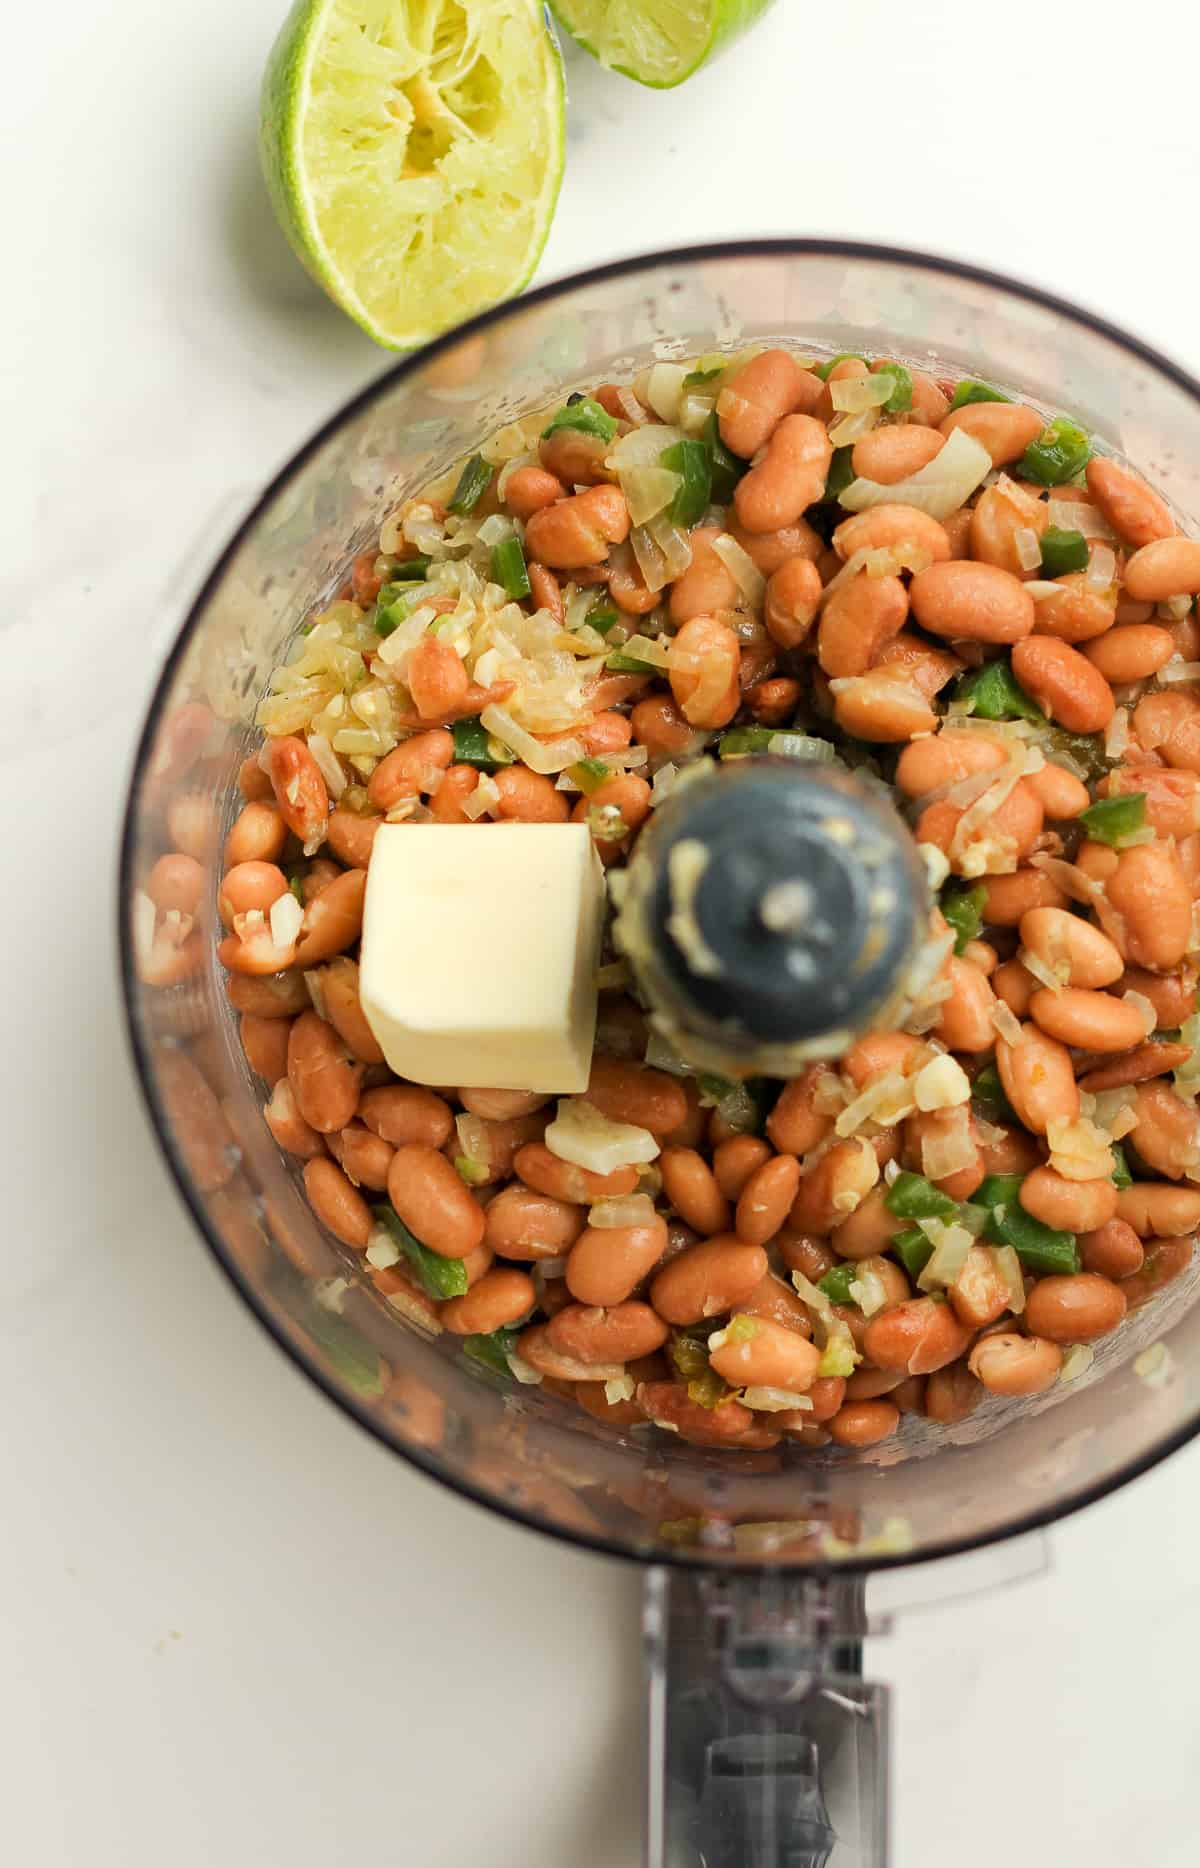 A food processor of pinto beans, sautéed veggies, and butter.